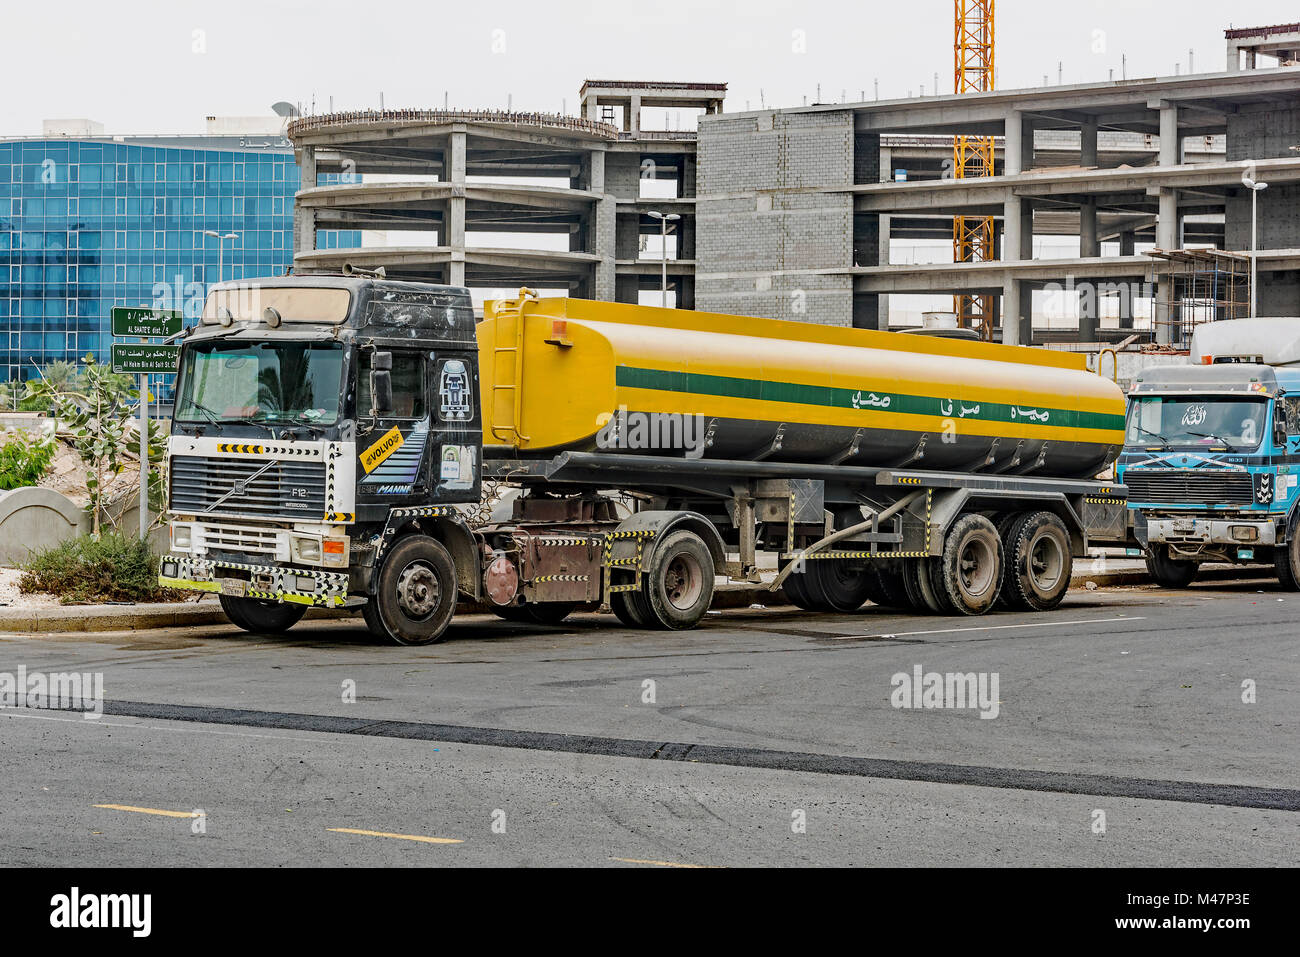 Jeddah water truck. One of many trucks in Jeddah used to transport water to houses, apartments and worksites. Potable water comes from desalination. Stock Photo